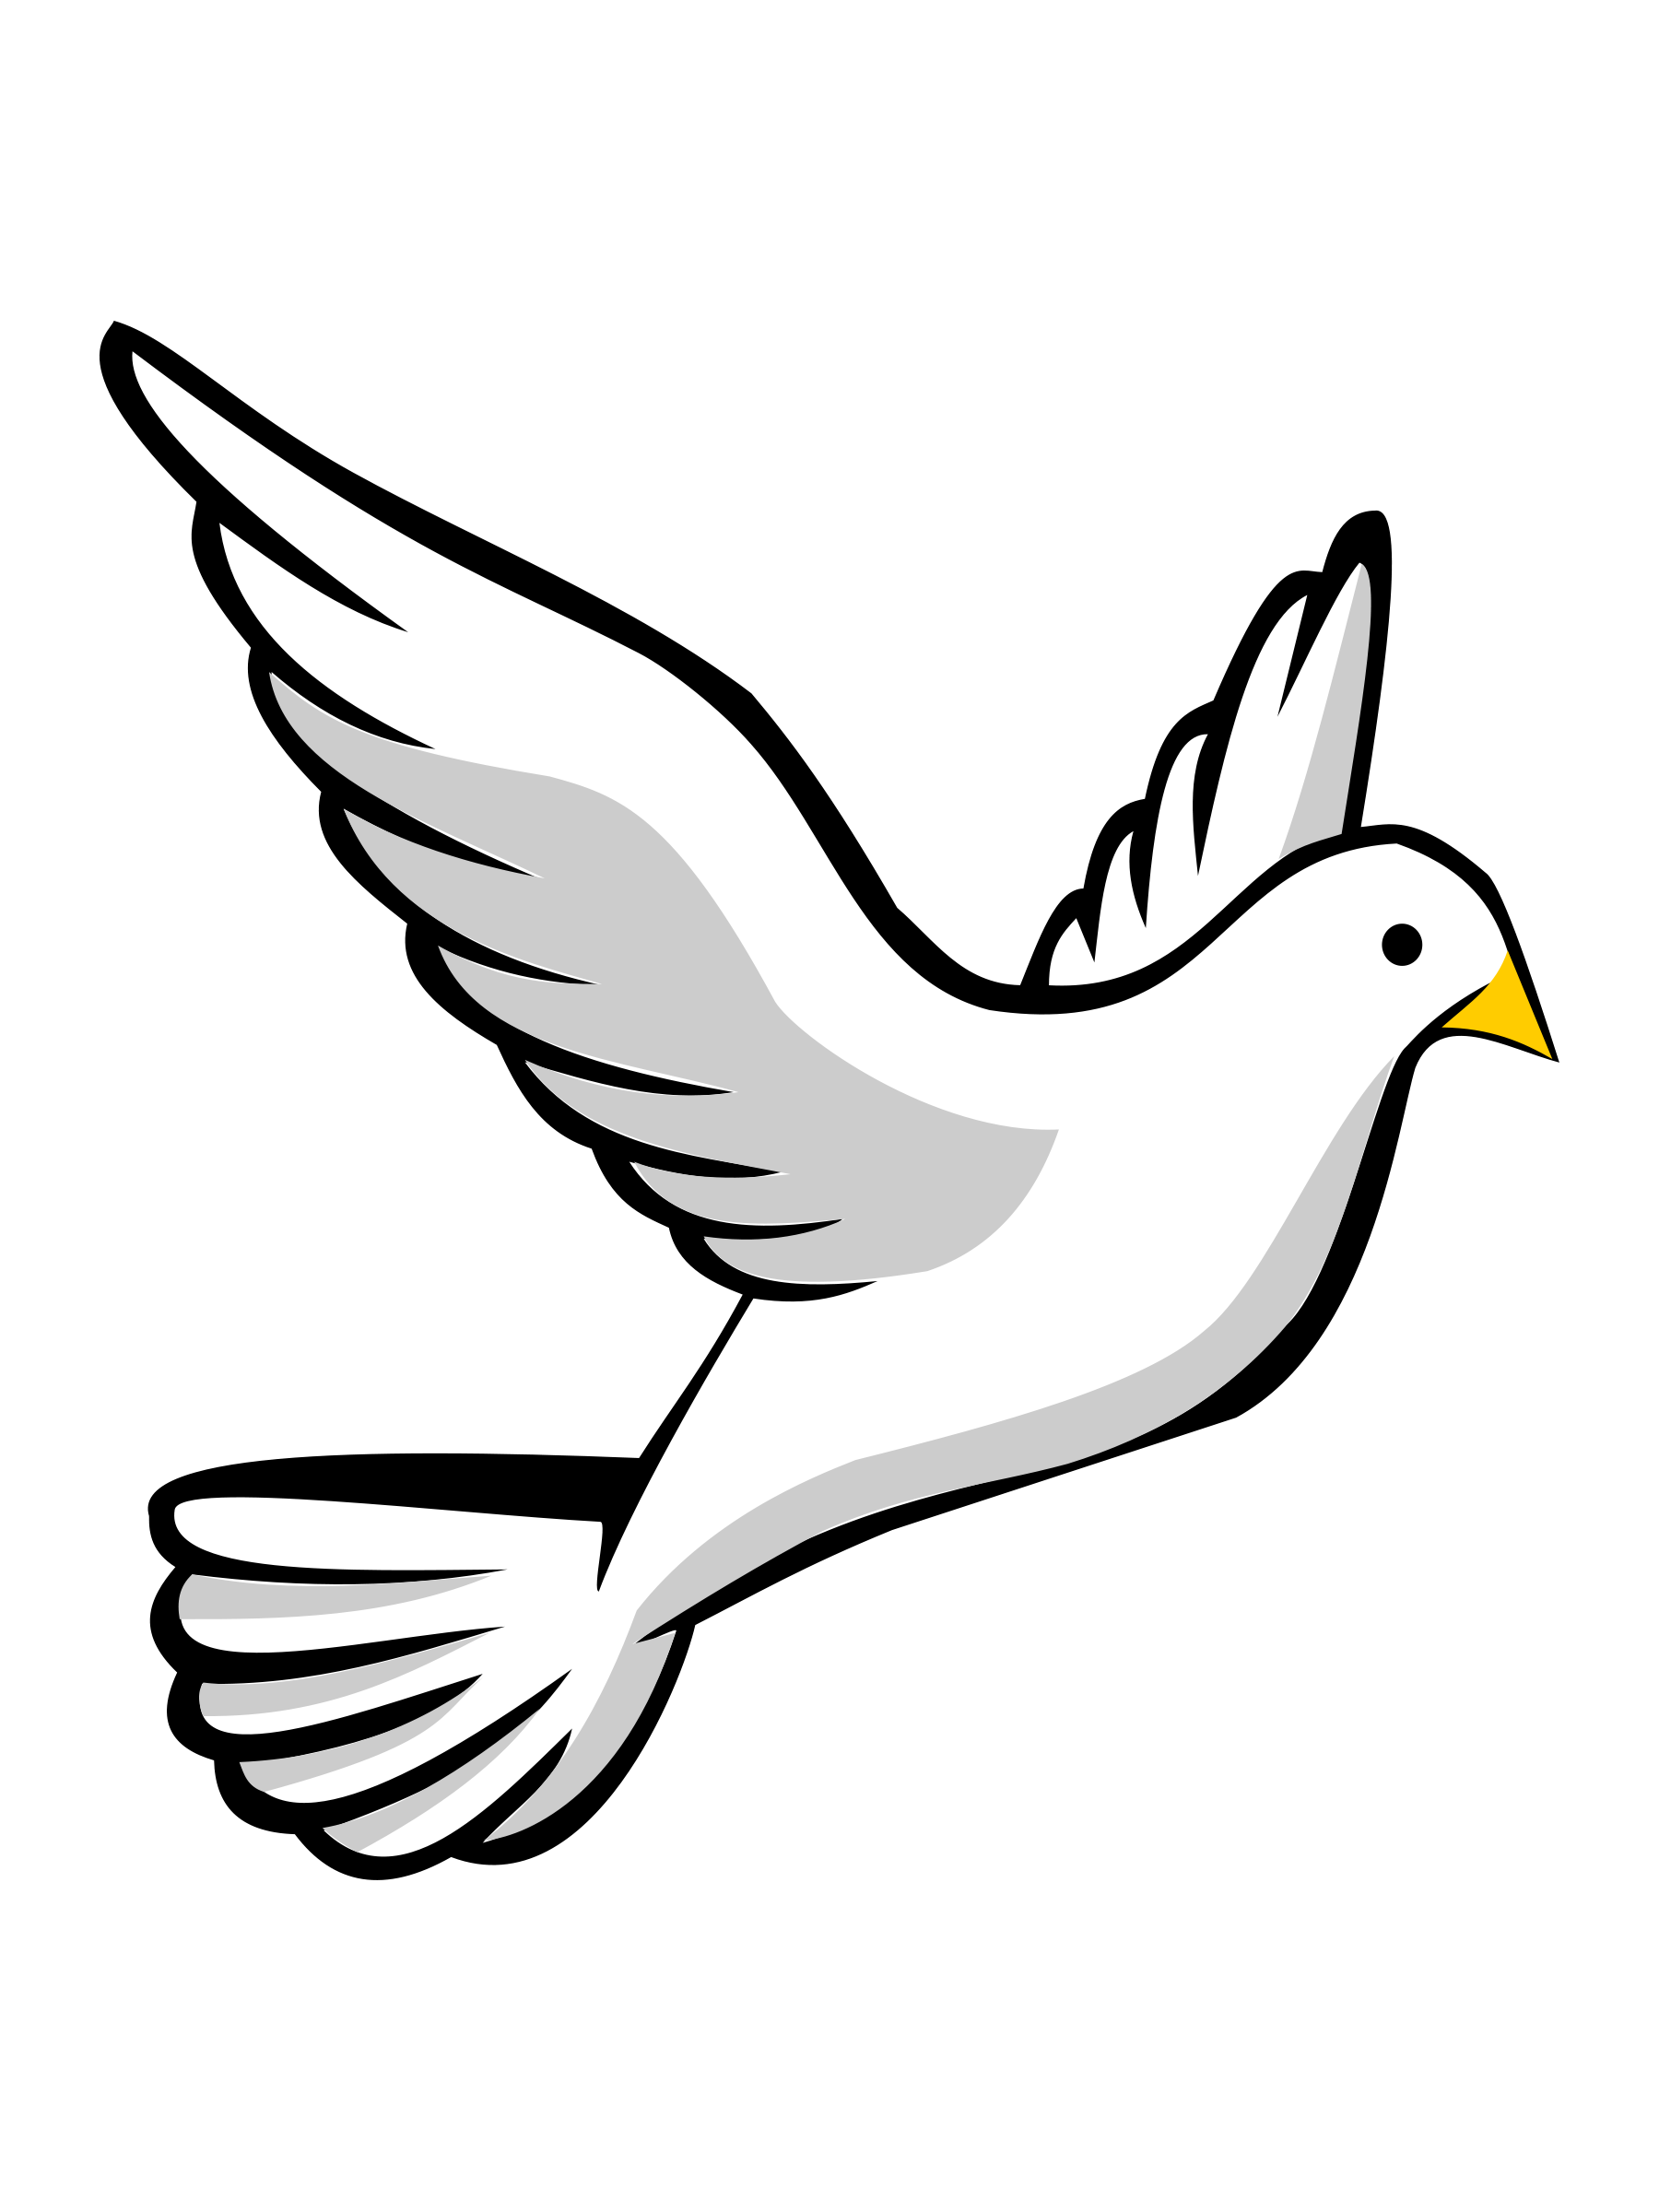 White Dove PNG Free Image